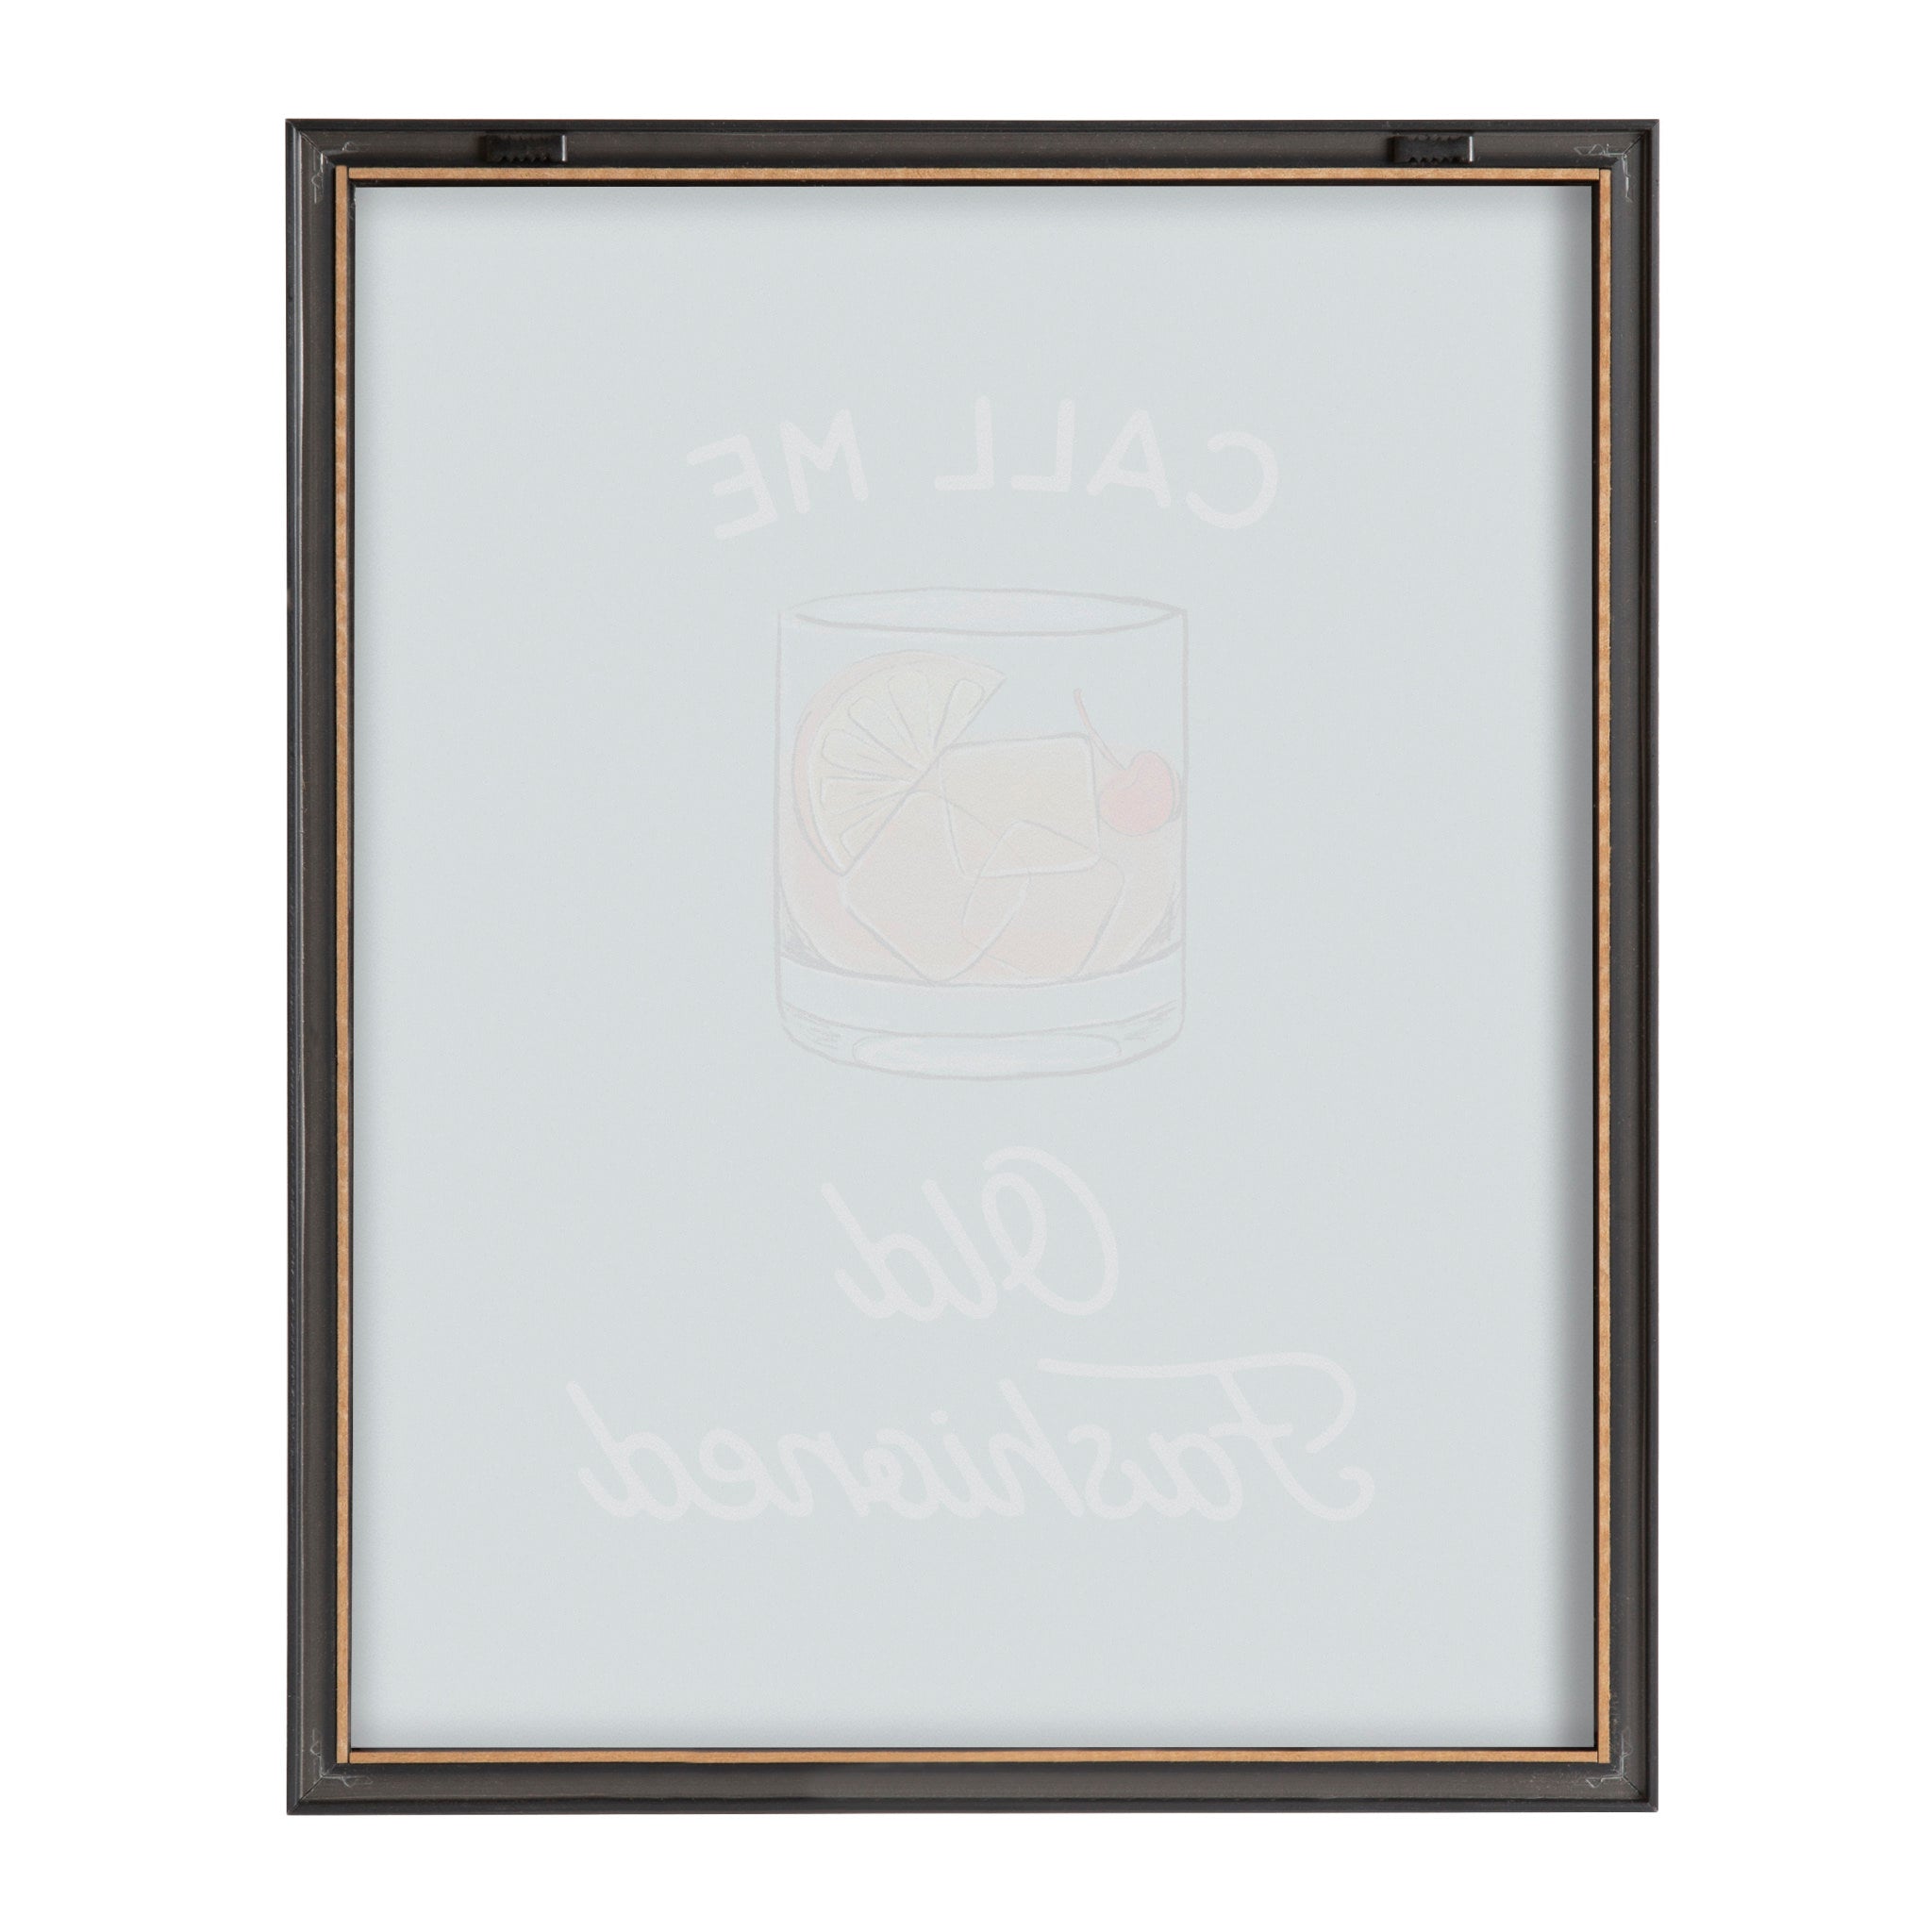 Blake Call Me Old Fashioned Blue Framed Printed Glass by The Creative Bunch Studio